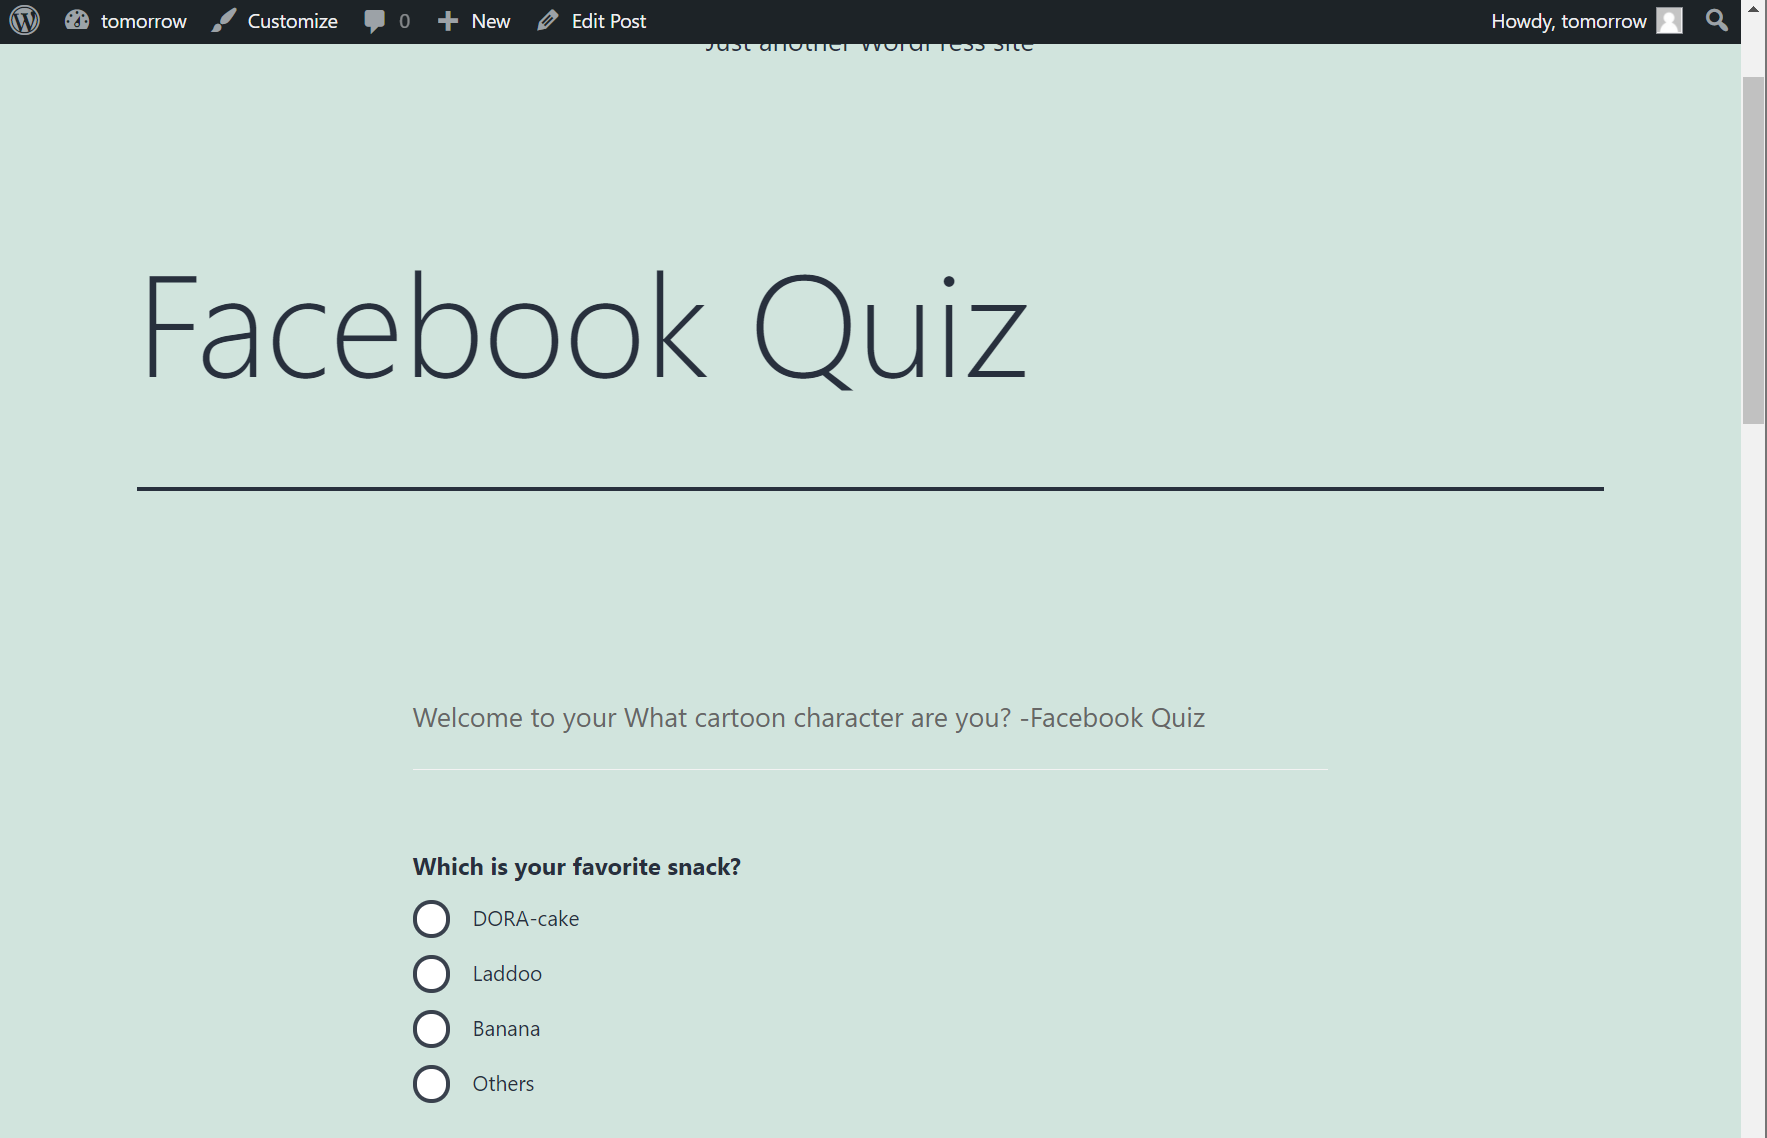 How to Grow Facebook Groups with a Quiz - Facebook Quiz